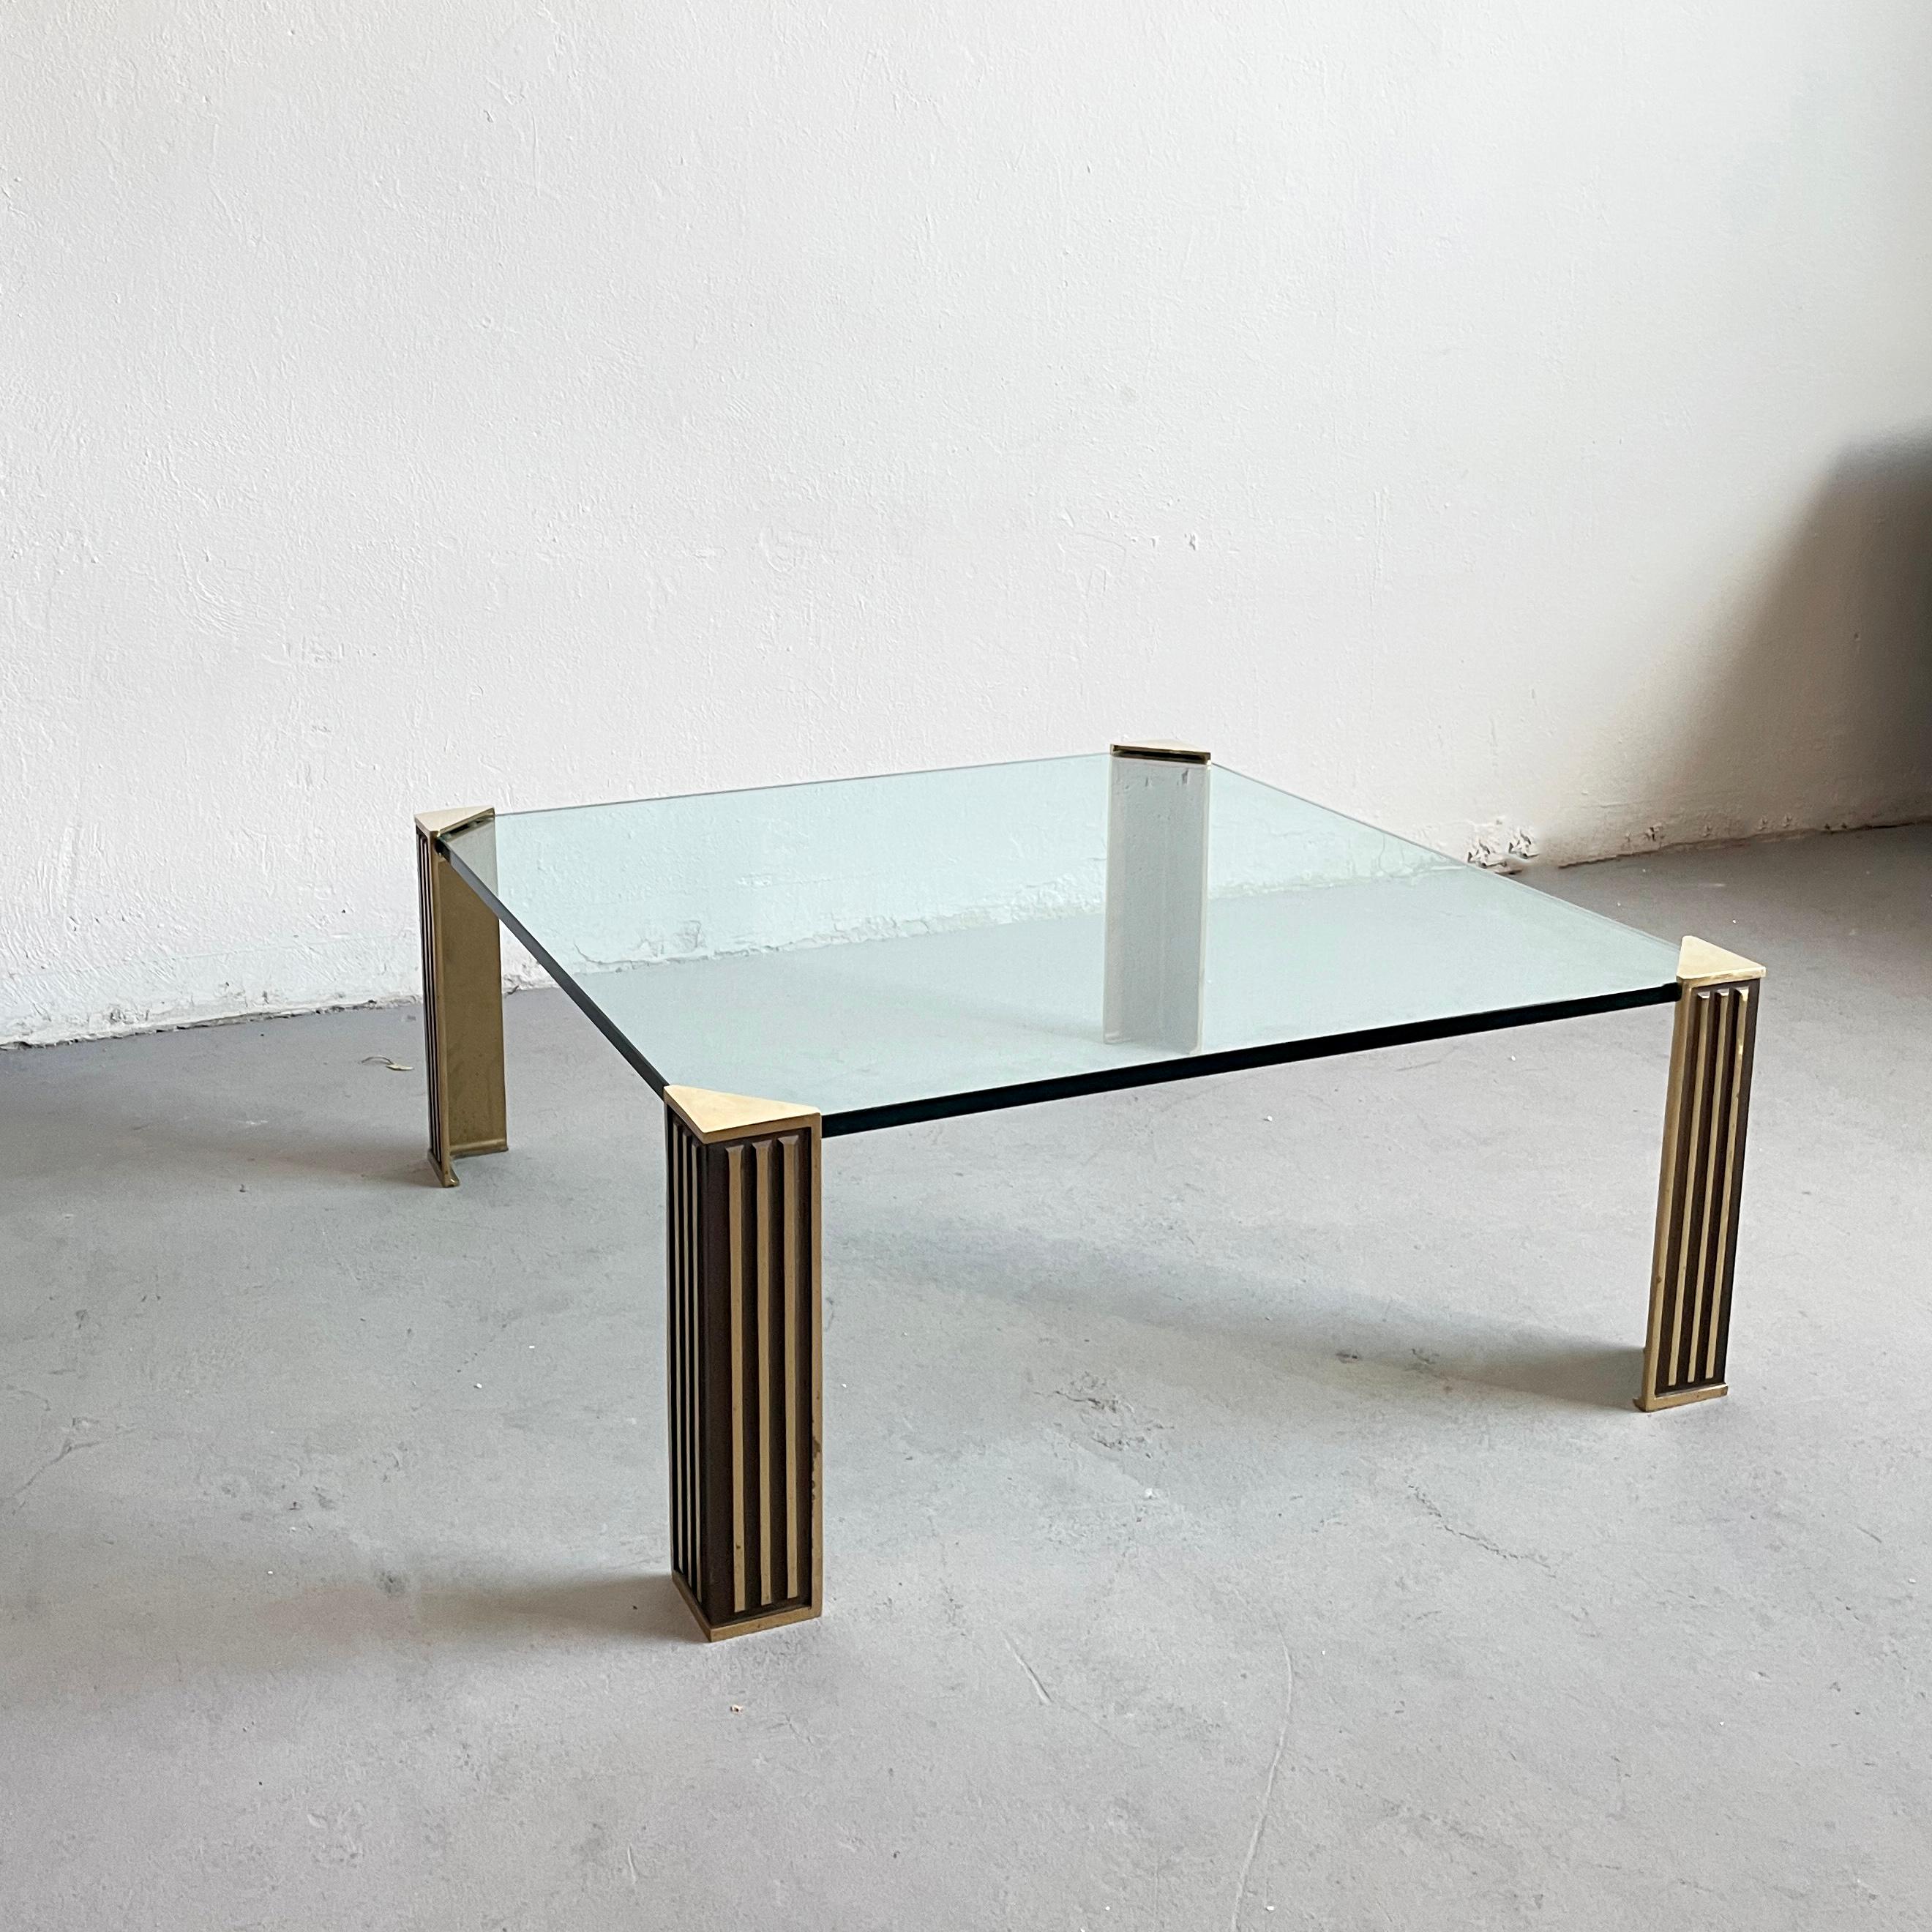 Stylish Hollywood Regency coffee table made of tinted glass top and brass legs

The glass measures 100 x 100 x 1.5 cm and it's very heavy.

The condition of the table is very good, showing just small traces of cosmetic wear.

